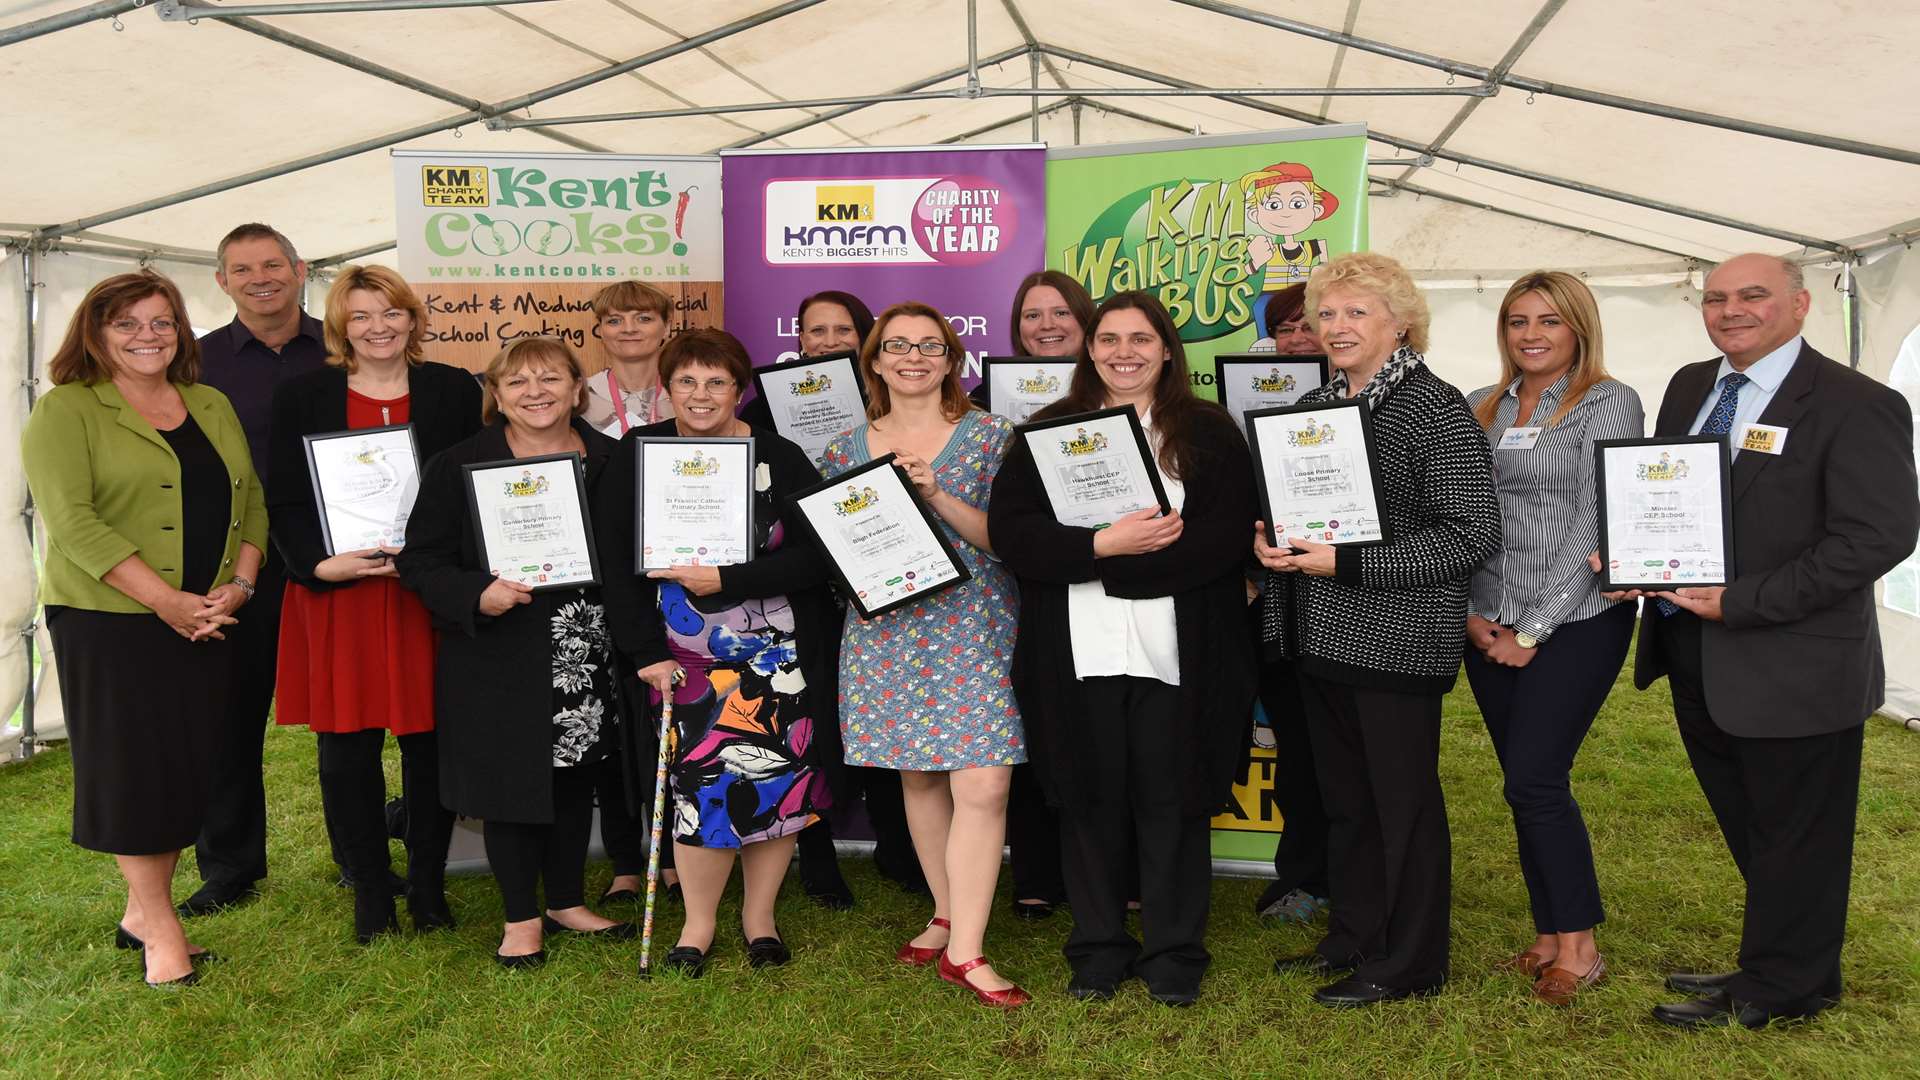 Walking Bus birthday certificate winners with supporters from Specsavers, Bel UK, Medway Council and KCC.